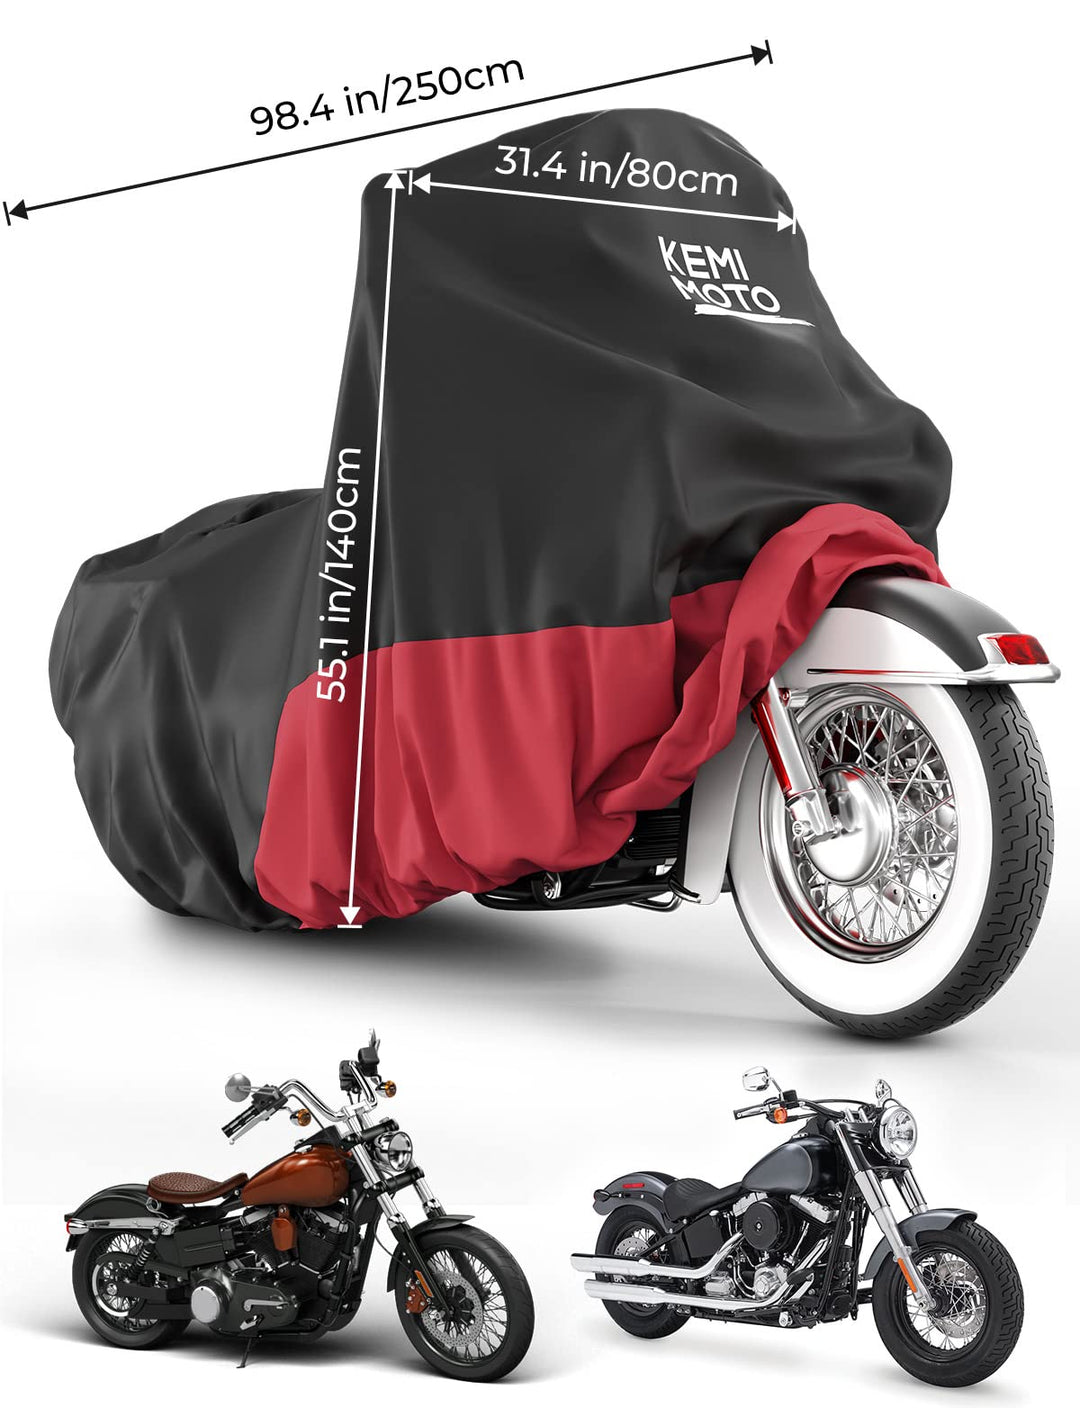 Dirt Bike Cover for Softail, Dyna Models, Shadow Cruiser - Kemimoto